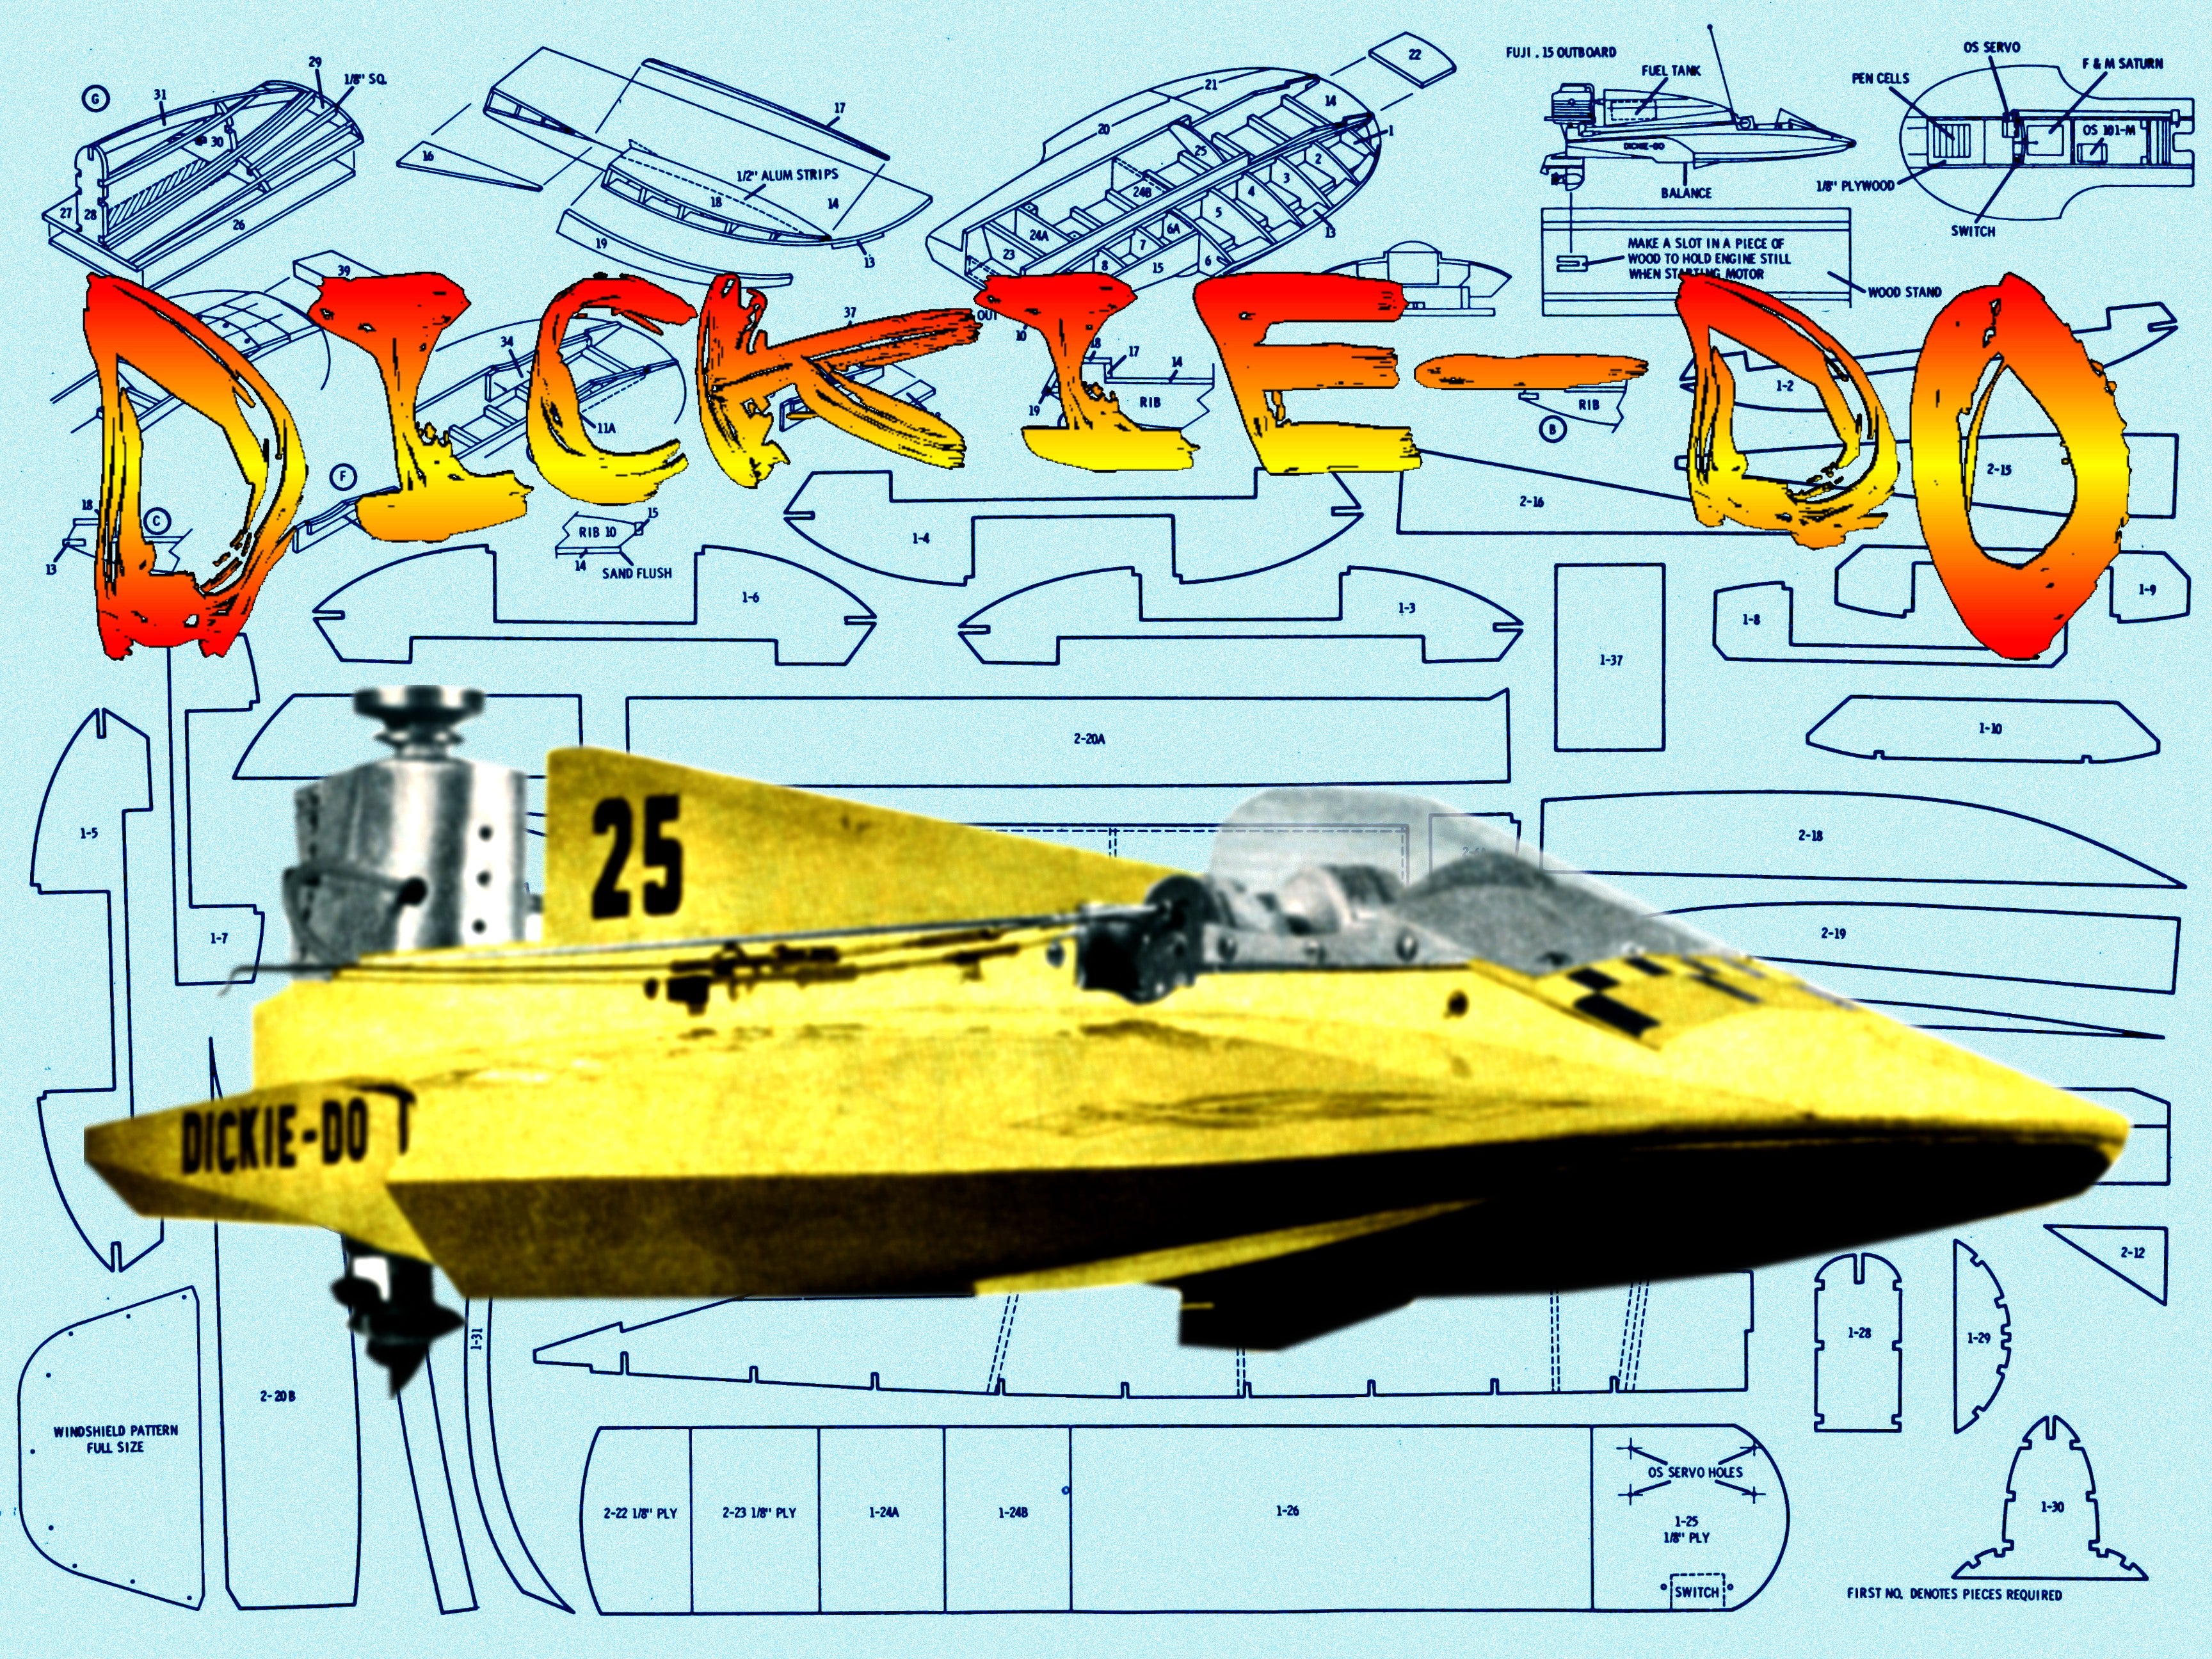 full size printed plans l 20” outboard racing hydroplane dickie-do for radio control